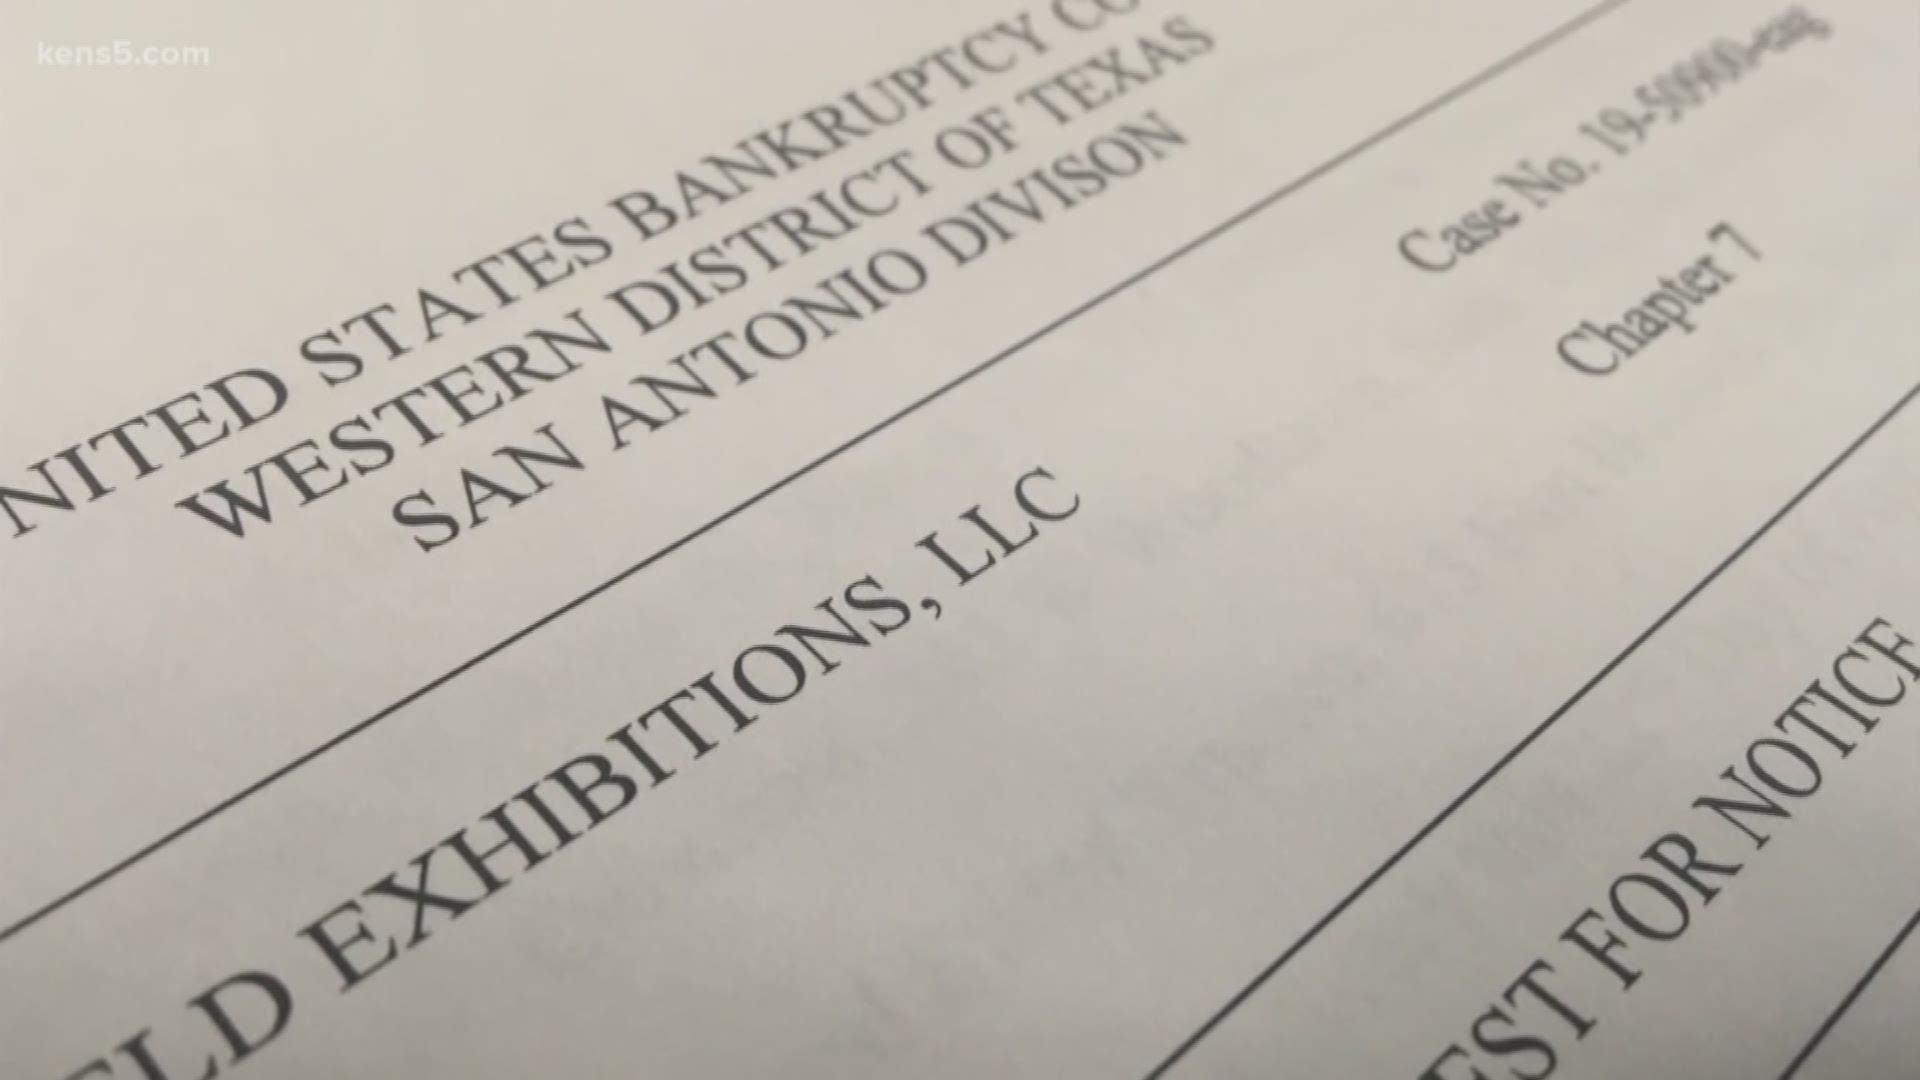 More than $48 million - that's how much debt was left by the short-lived Alliance of American Football league. Bankruptcy documents obtained by KENS 5 show some of those outstanding balances were left here in San Antonio. According to a bankruptcy attorney, those businesses - as well as ticket holders - will never see a dime.